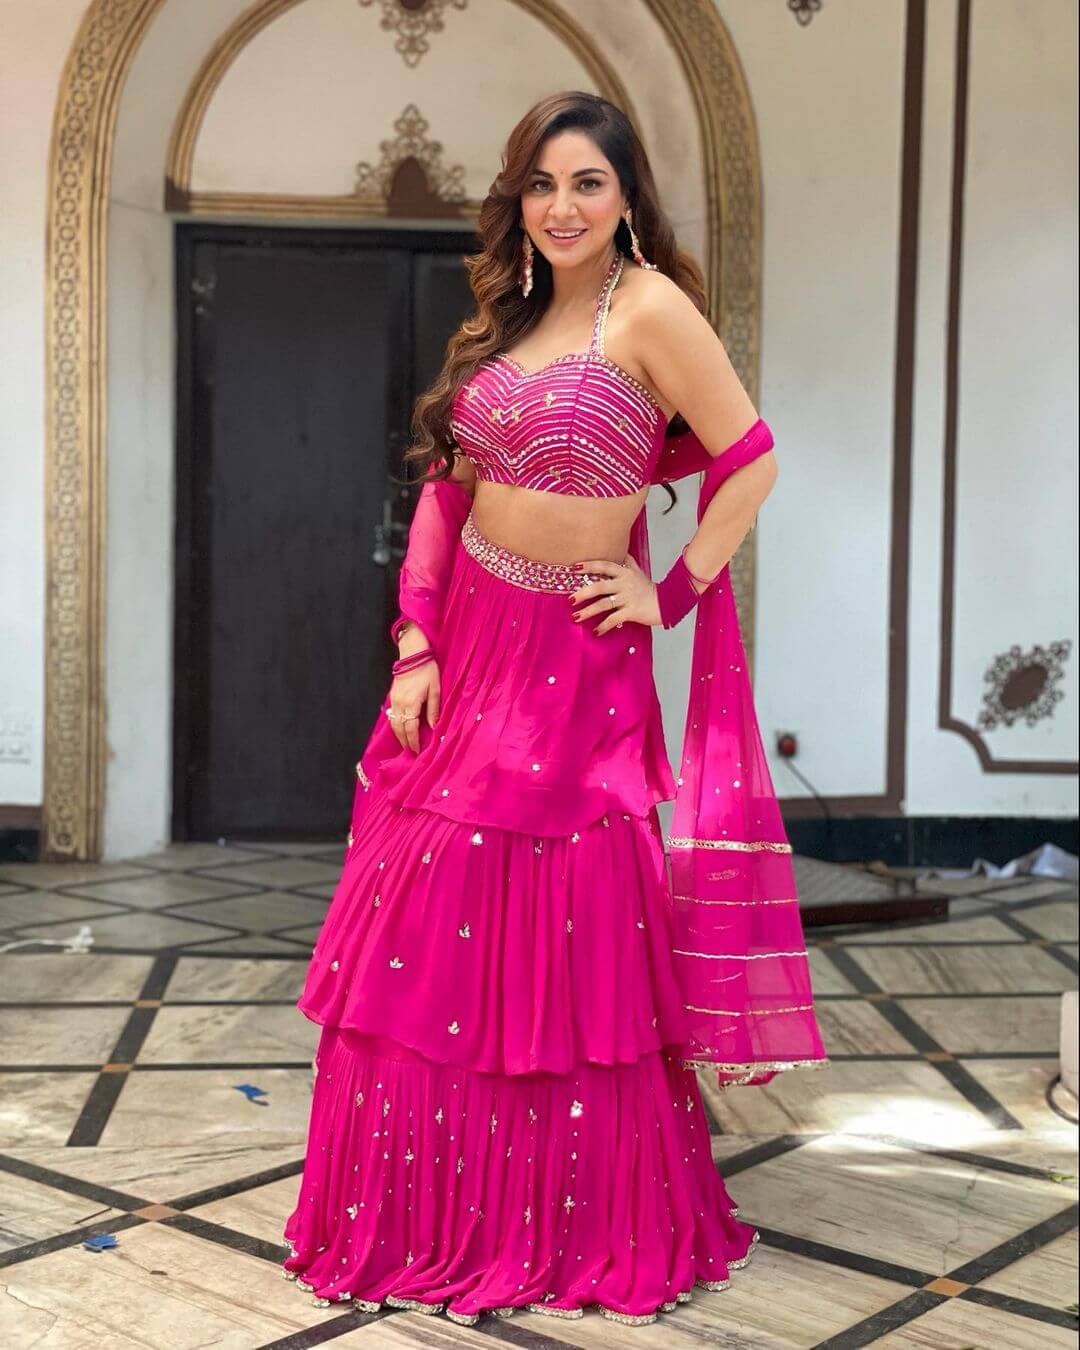 Trending Diwali Outfit Ideas for you to choose from Stunning Pink Lehenga to get the Festive vibes